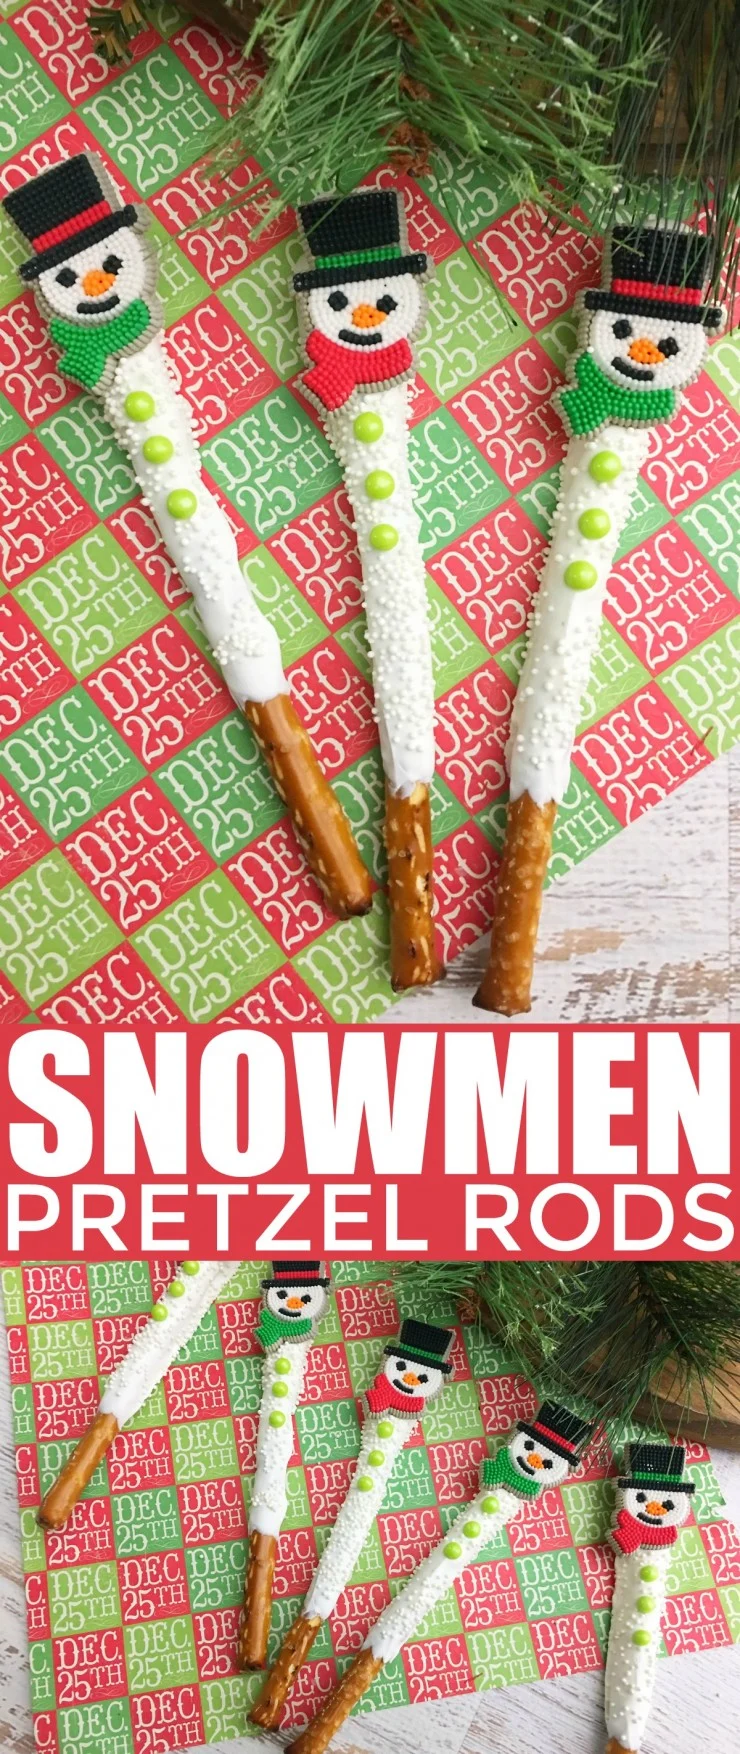 These snowmen pretzel rods are a fun and festive holiday treat. These sweet and salty snacks are great for Christmas parties and super easy to make. A sure way to impress guests!